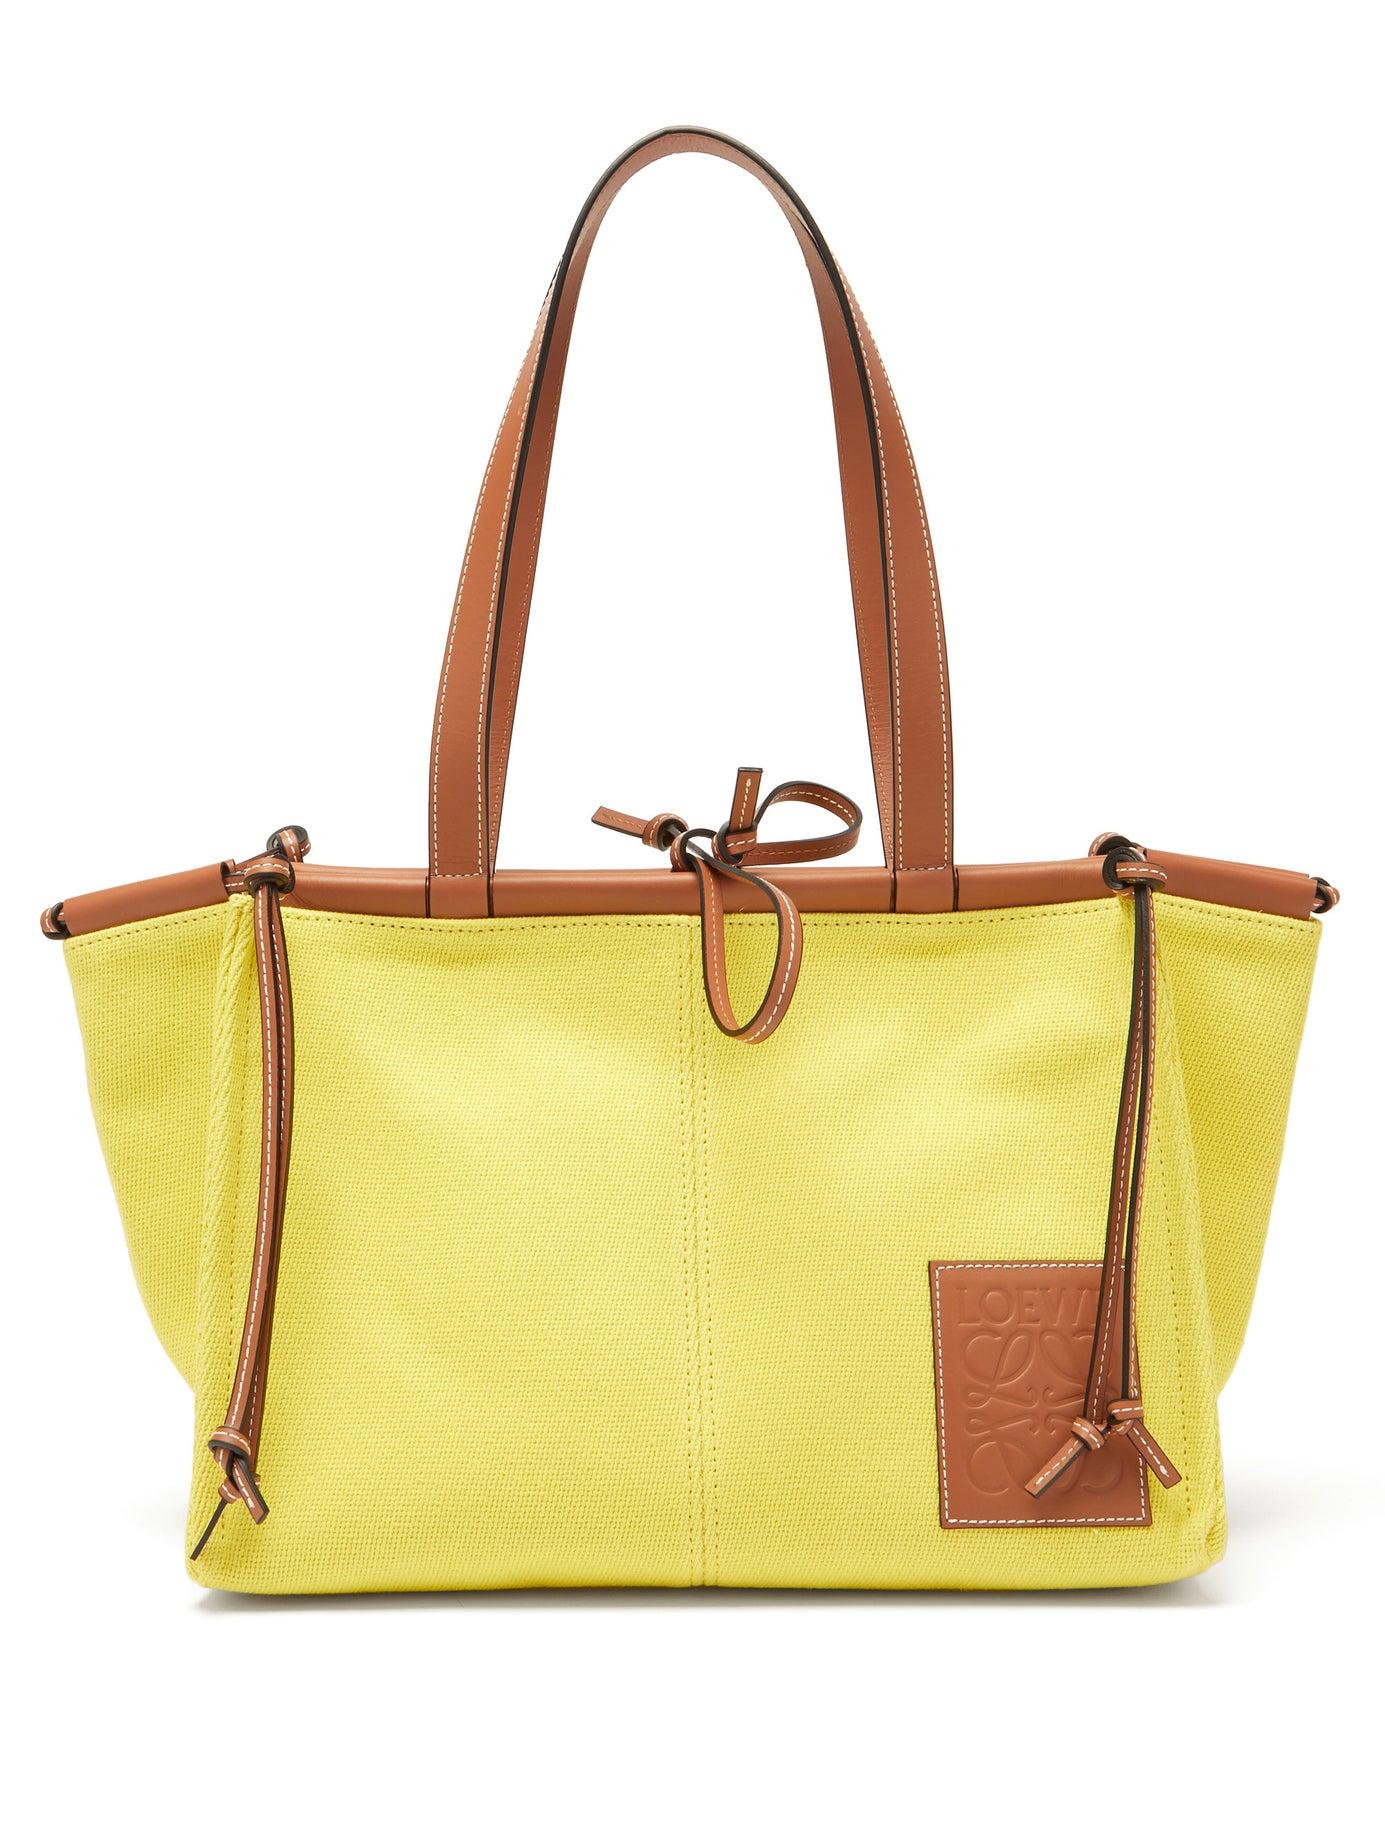 Loewe Cushion Small Canvas Tote Bag in Yellow - Lyst